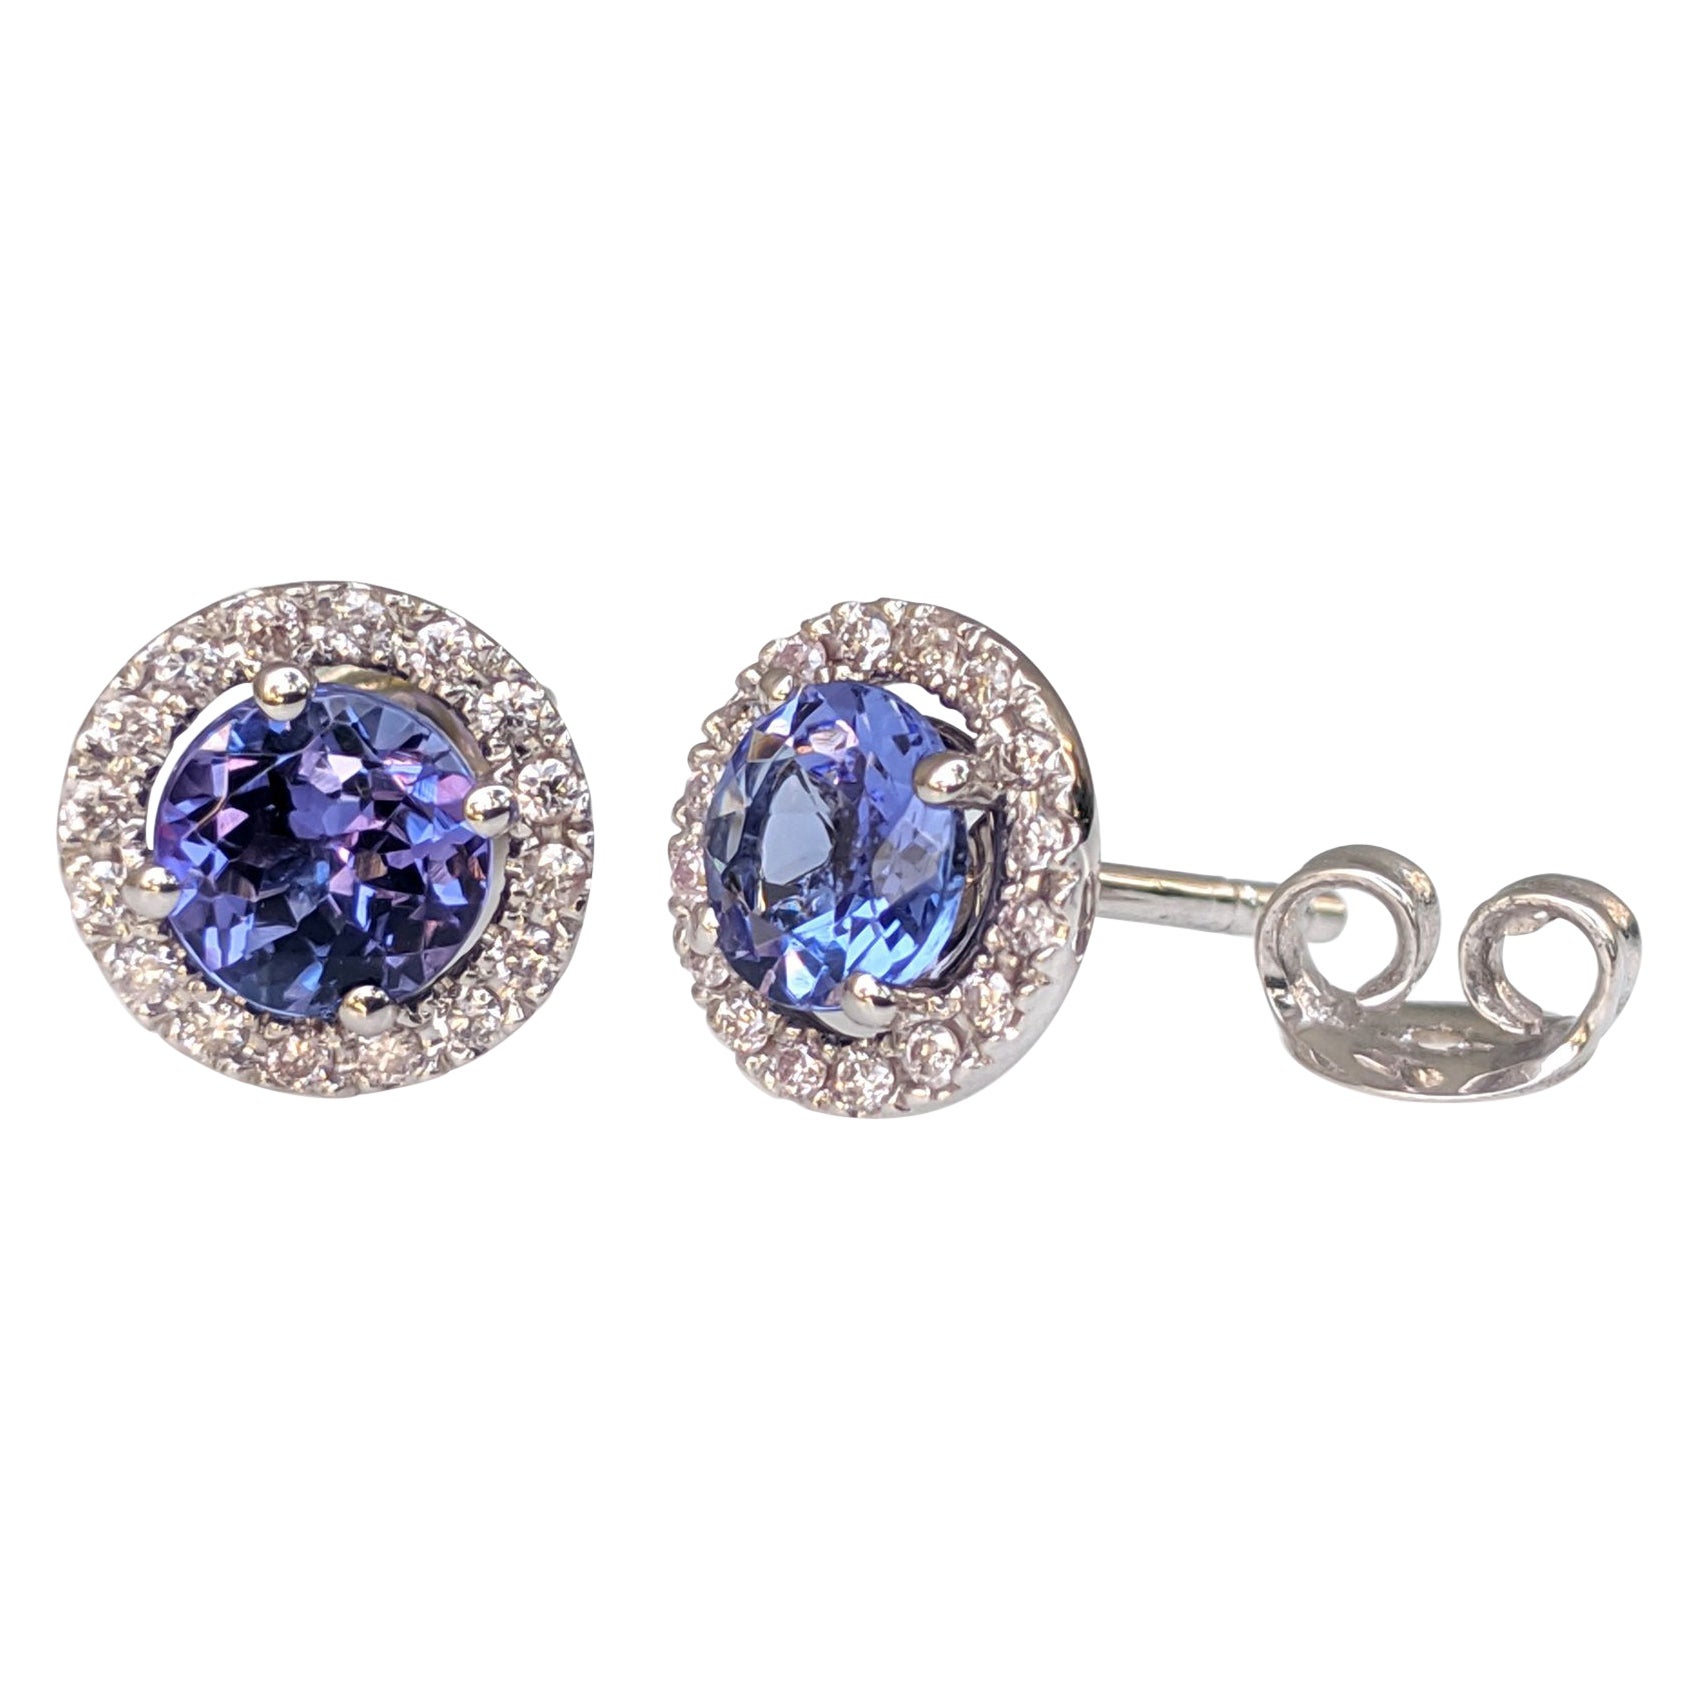 NO RESERVE! 1.48Ct Tanzanite & 0.25Ct Pink Diamonds 14 kt. White gold Earrings For Sale